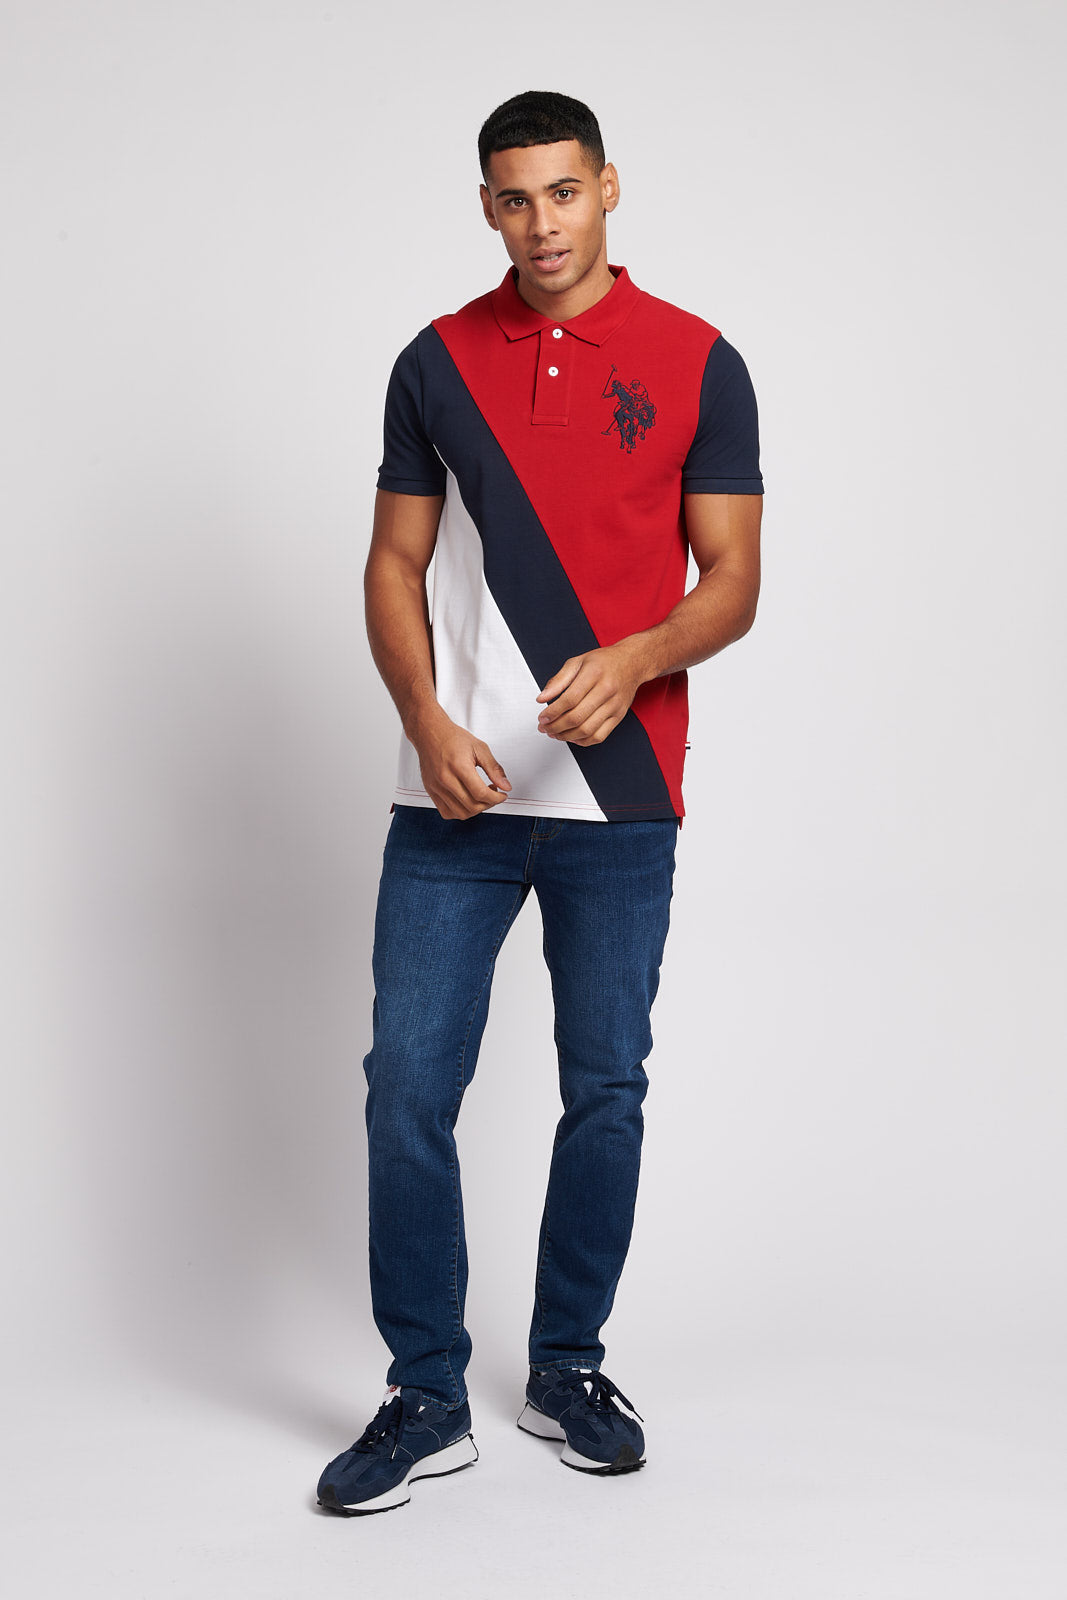 Mens Angle Cut and Sew Polo Shirt in Haute Red